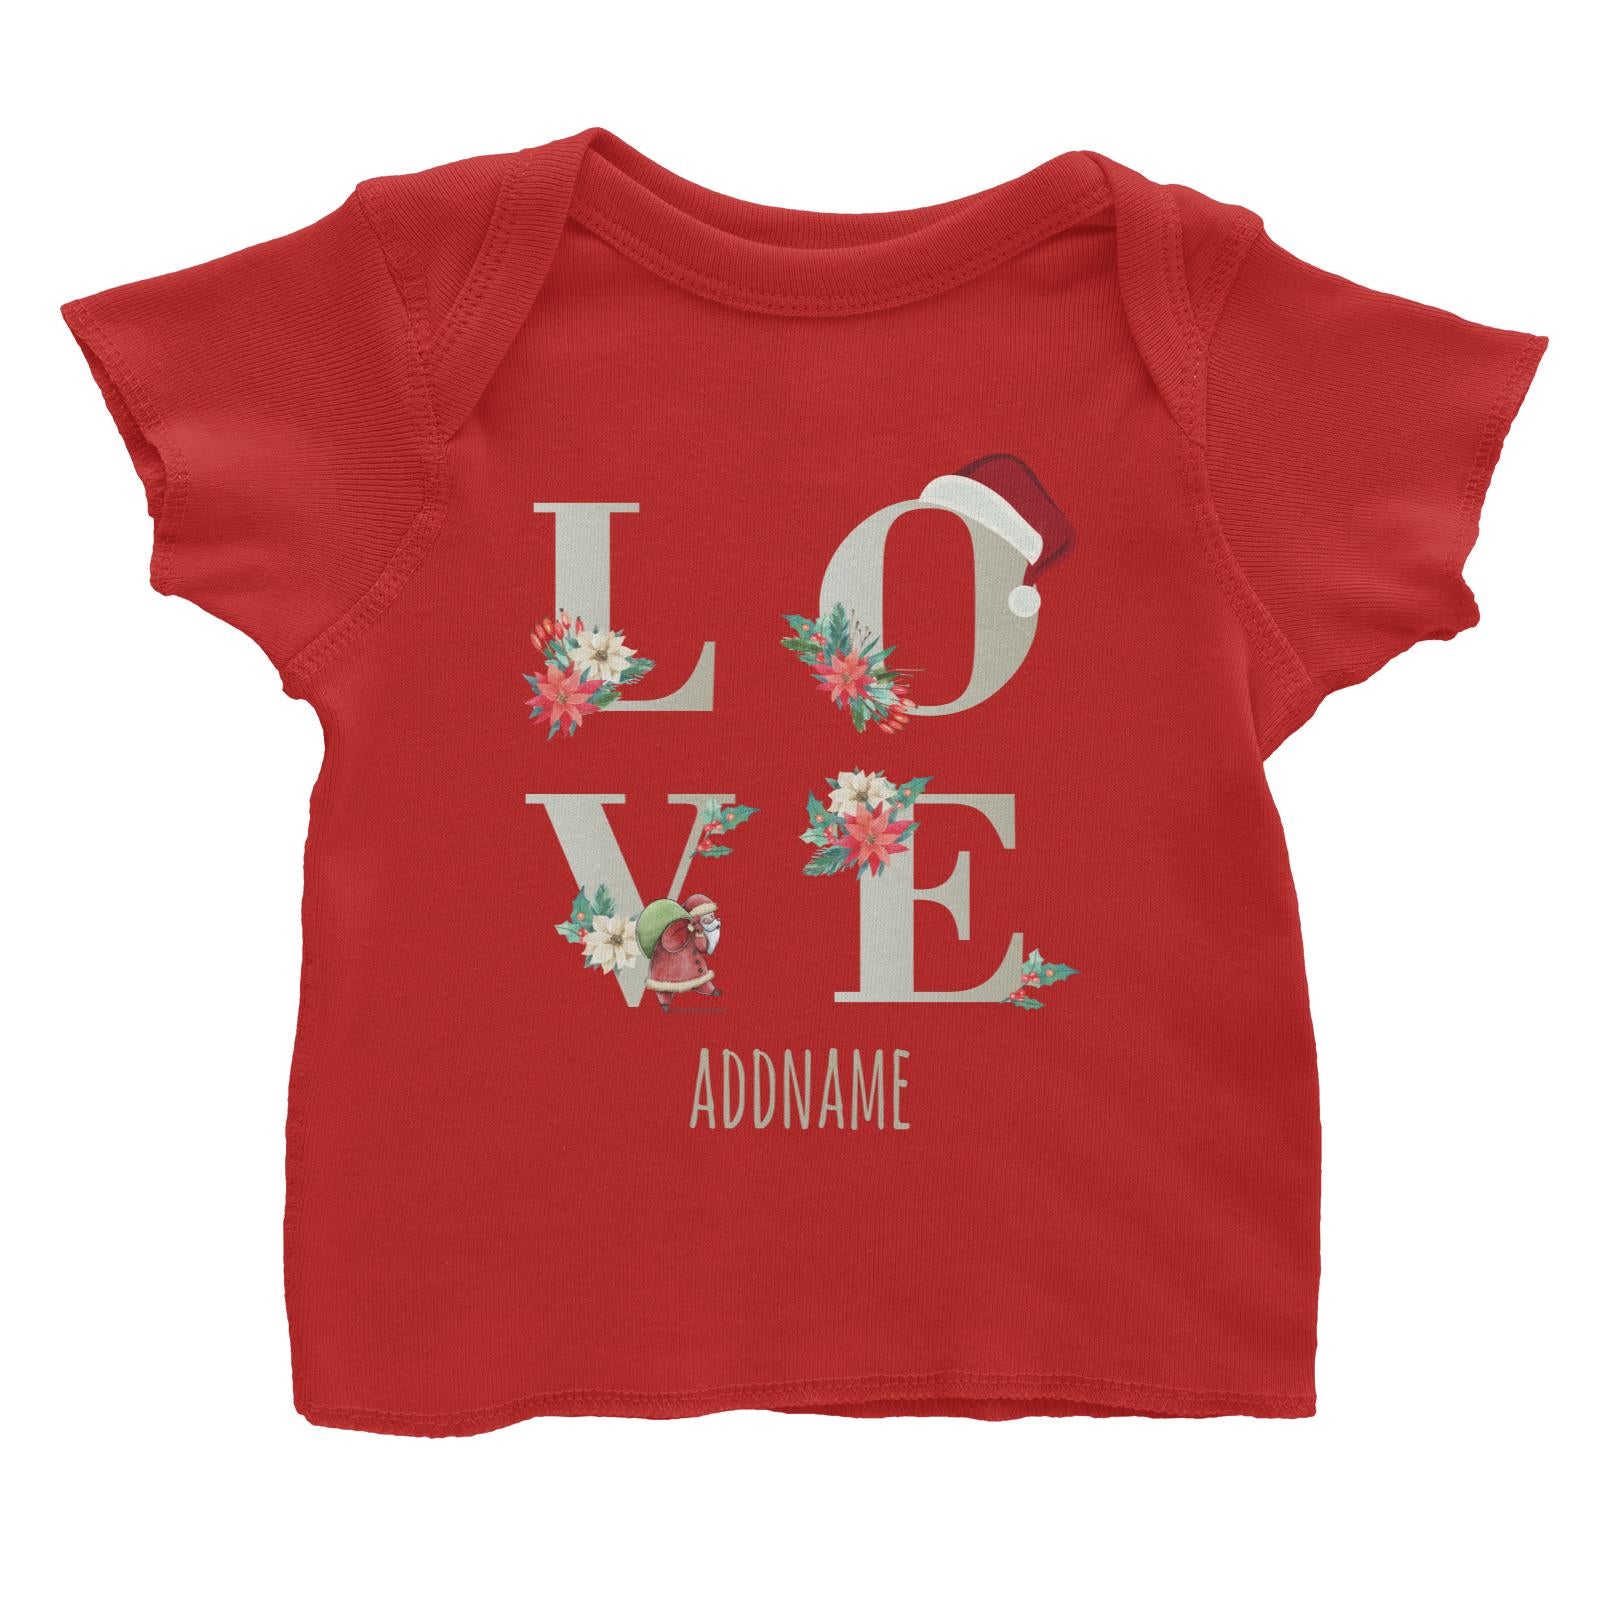 LOVE with Christmas Elements Addname Baby T-Shirt